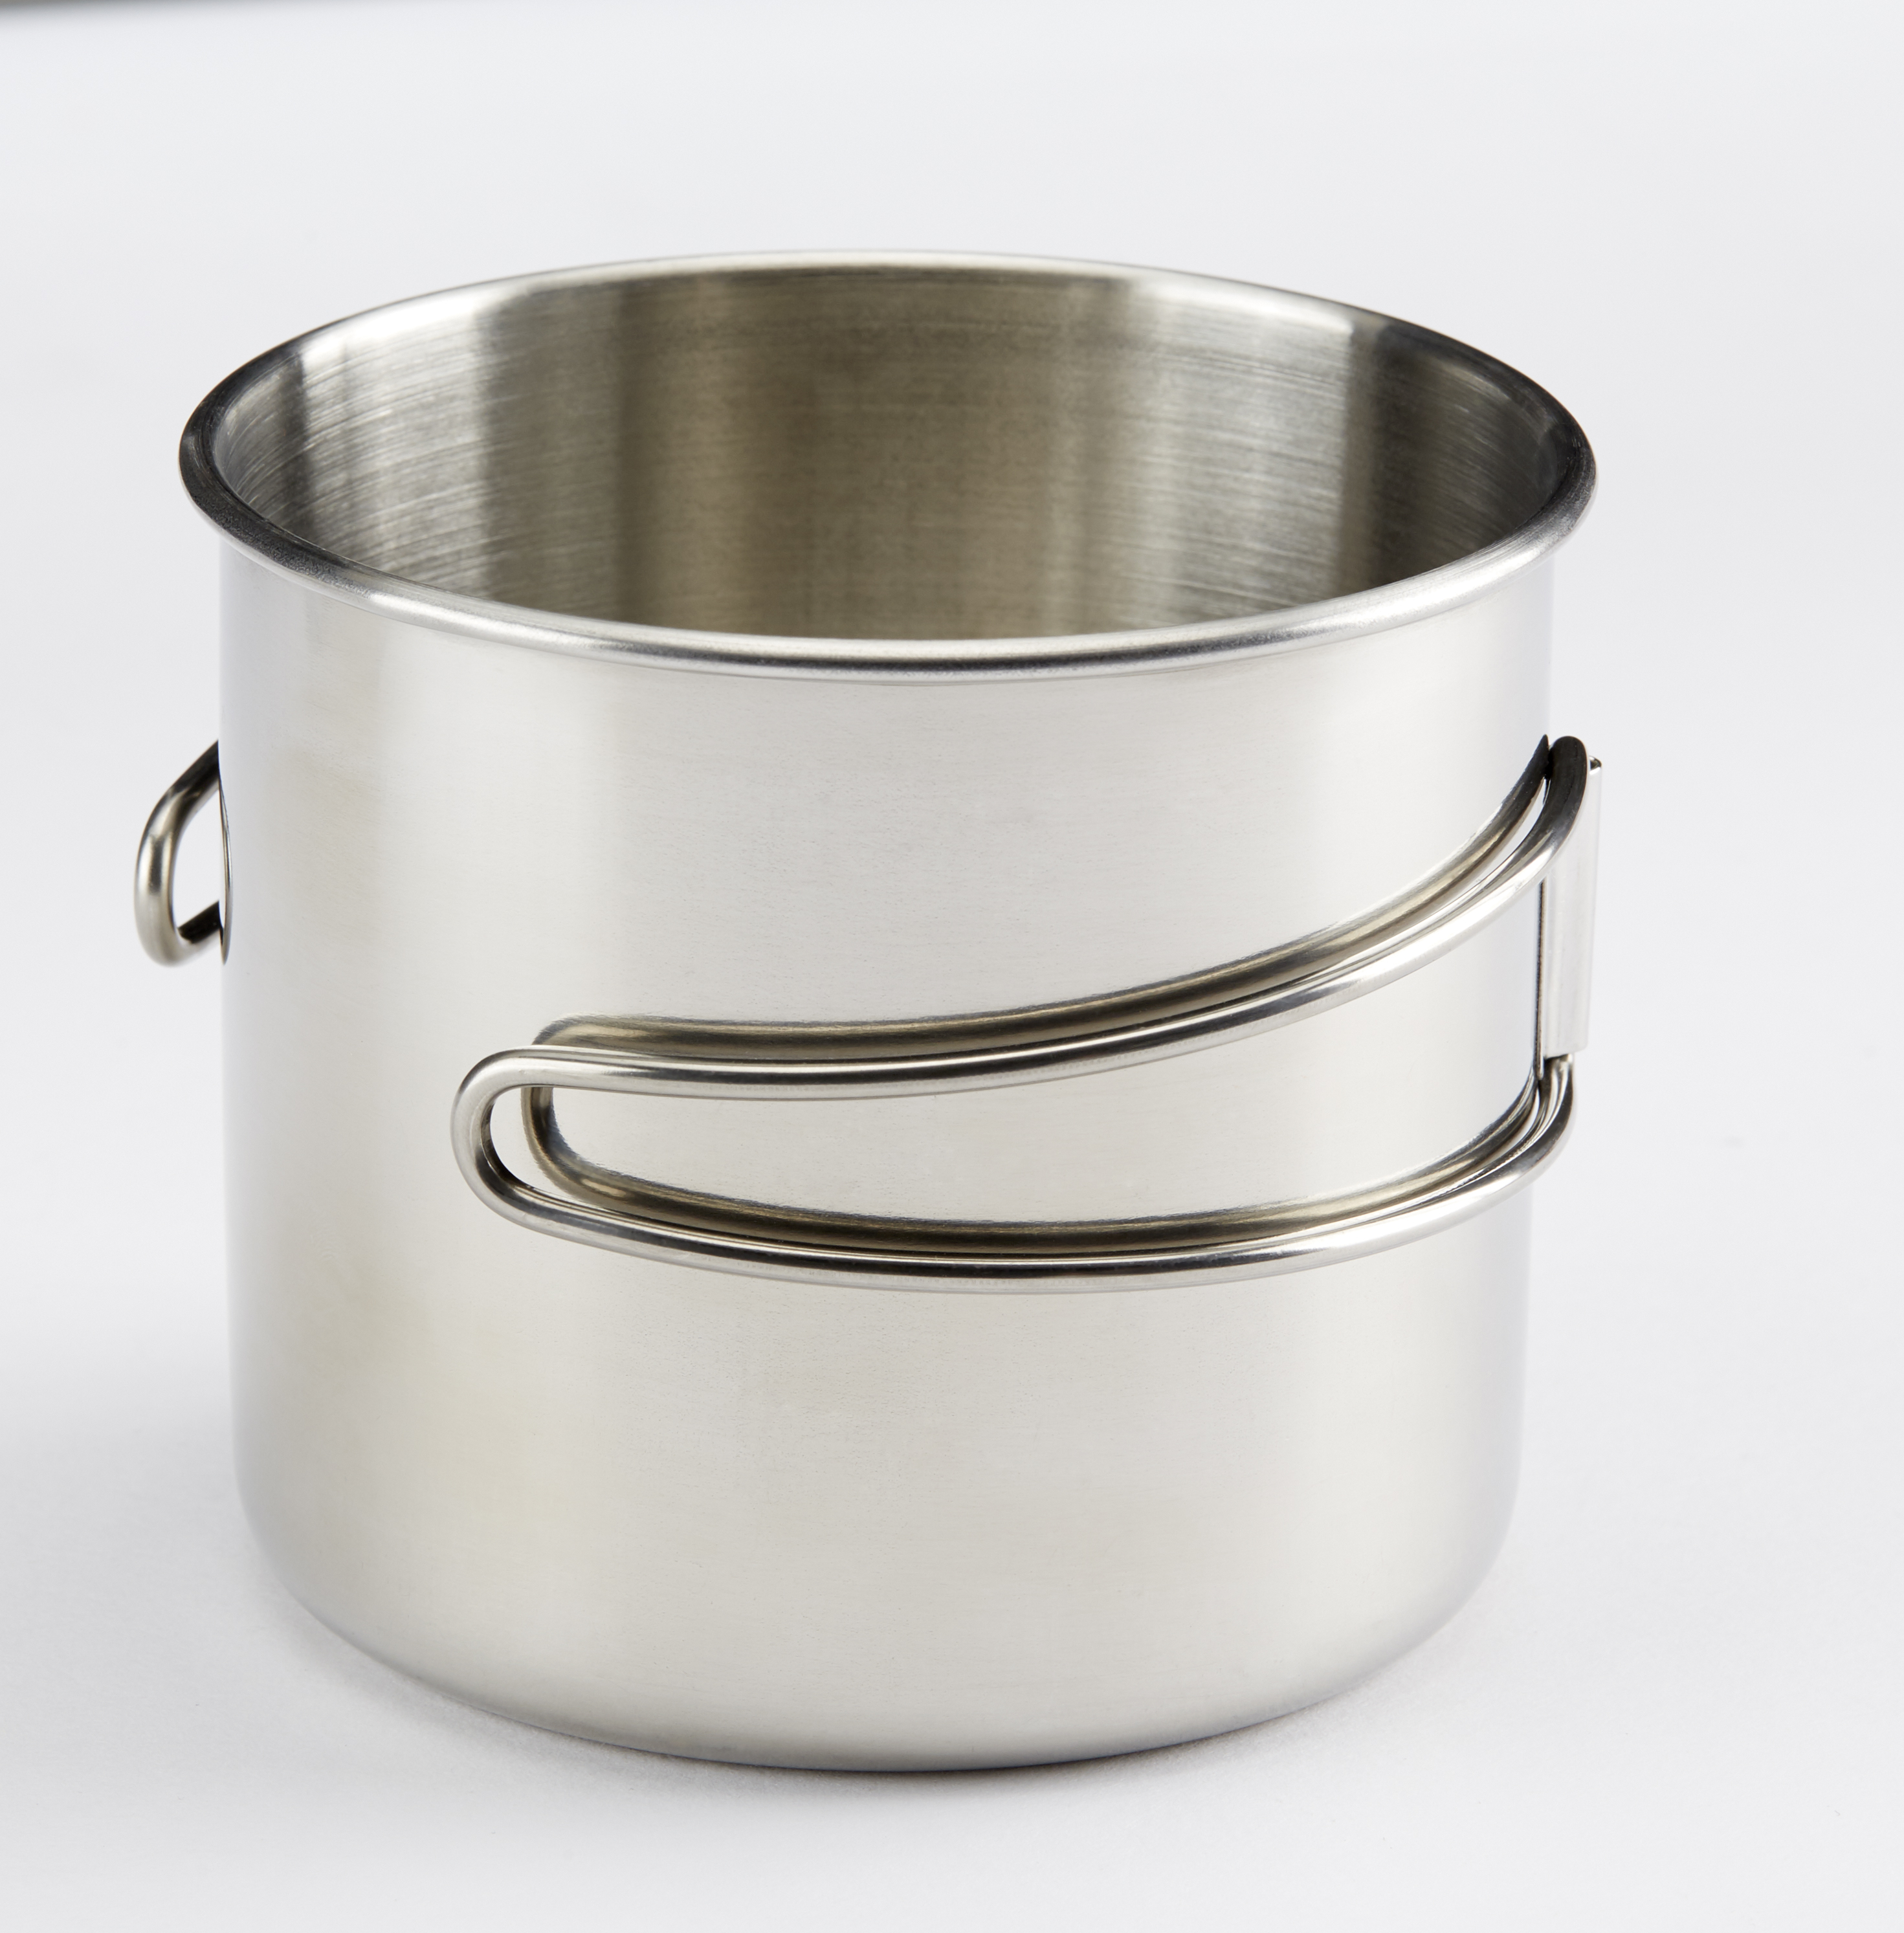 Ozark Trail 18-Ounce Stainless Steel Cup - image 5 of 7